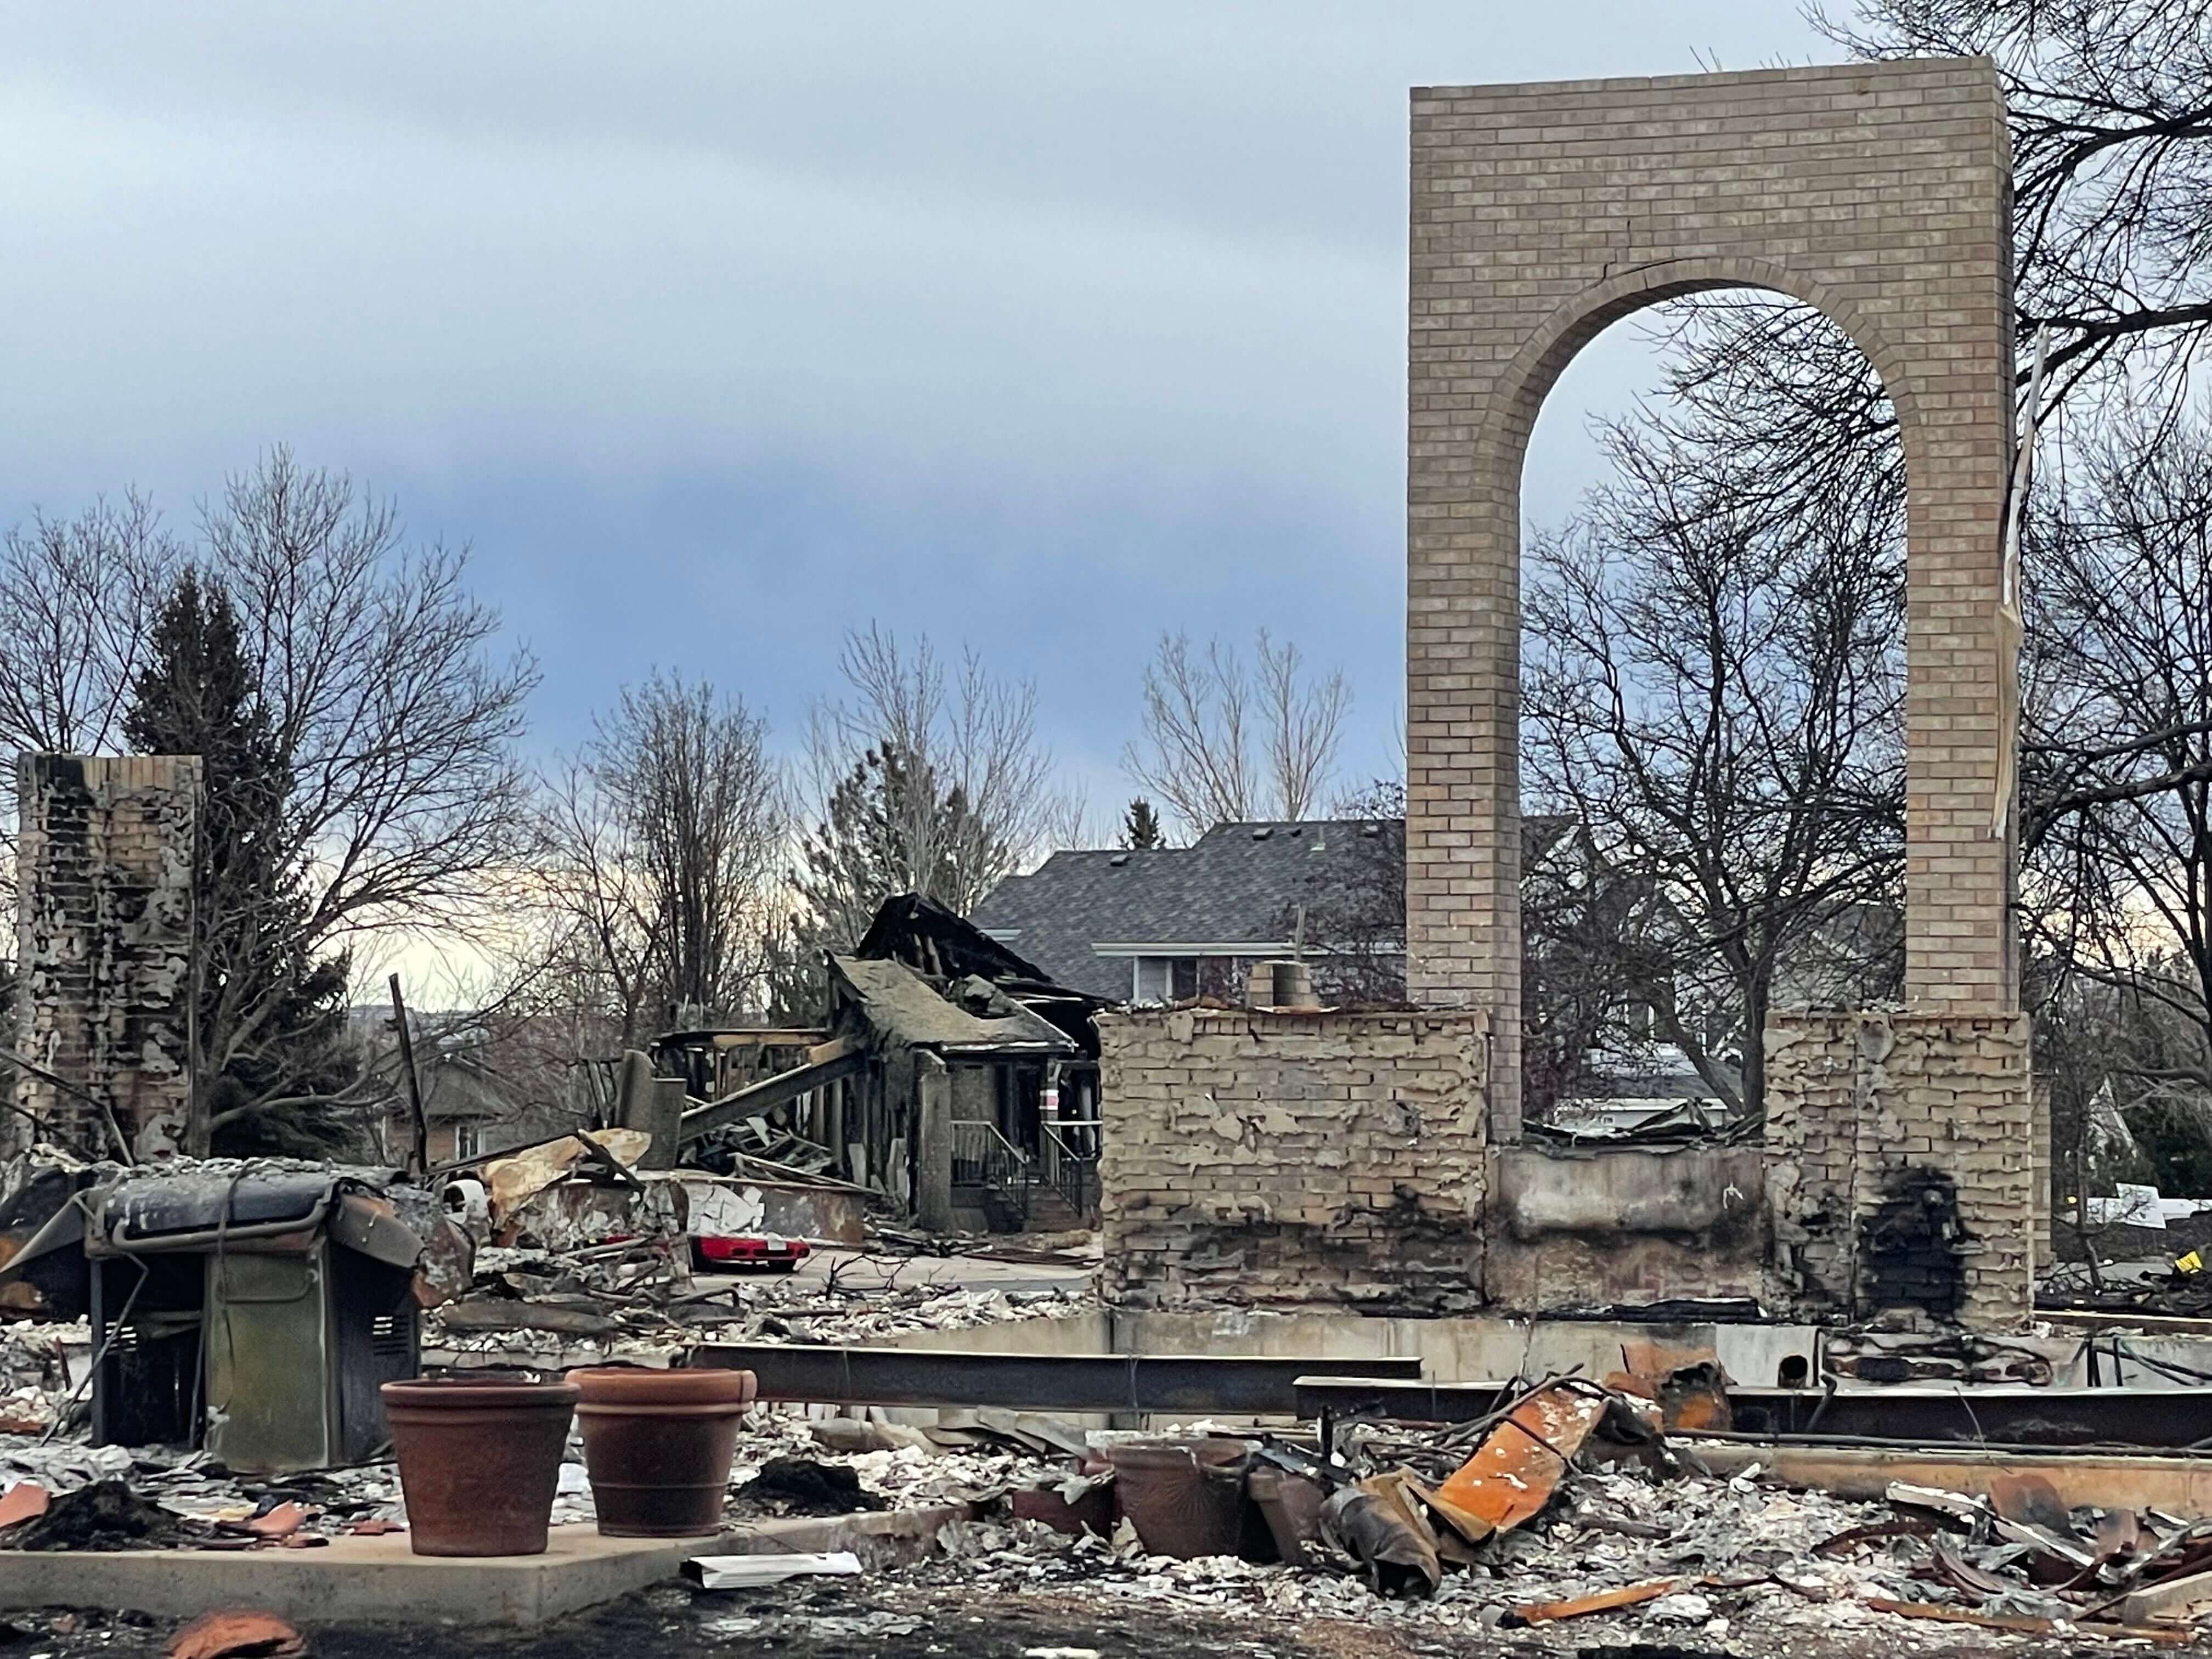 Remains of burned down home, brick archway only remains